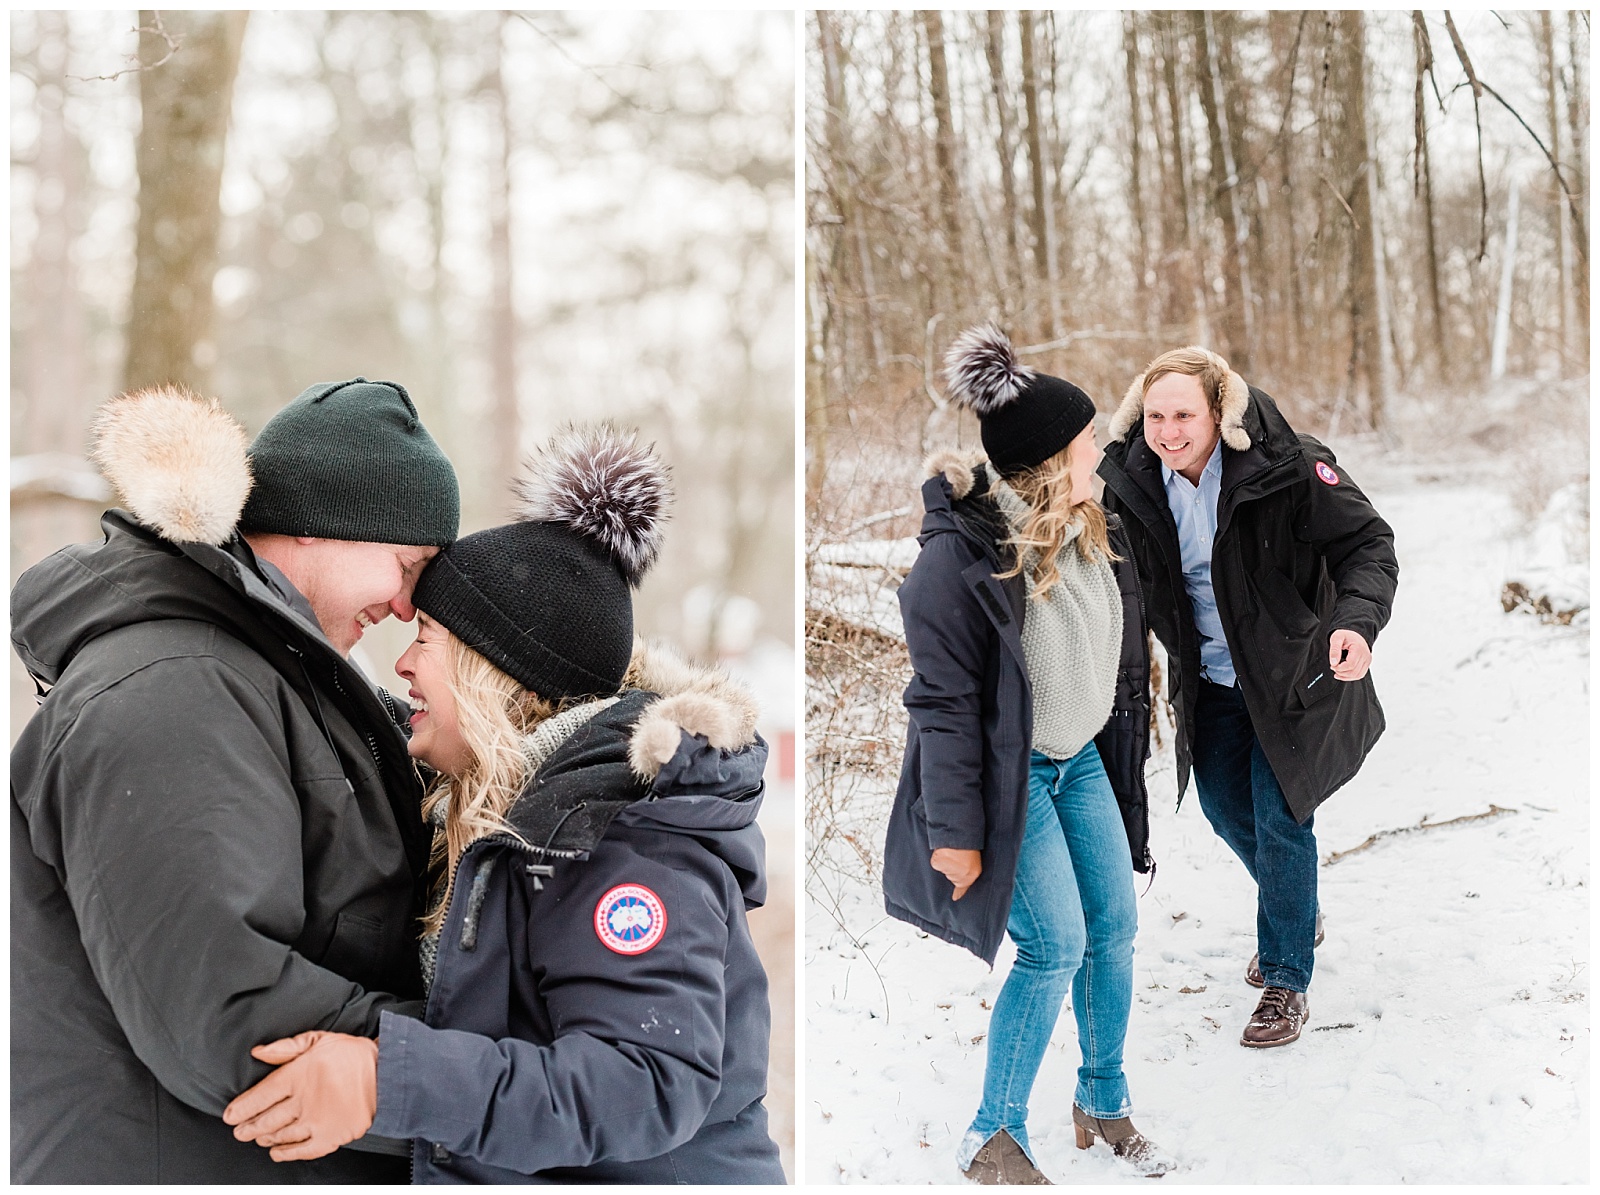 New Jersey Engagement Session, Snowy, Winter, Cozy, Session, Wedding Photographer, Cross Estate Gardens, Snow, Wintry, Light and Airy, Woods, forest